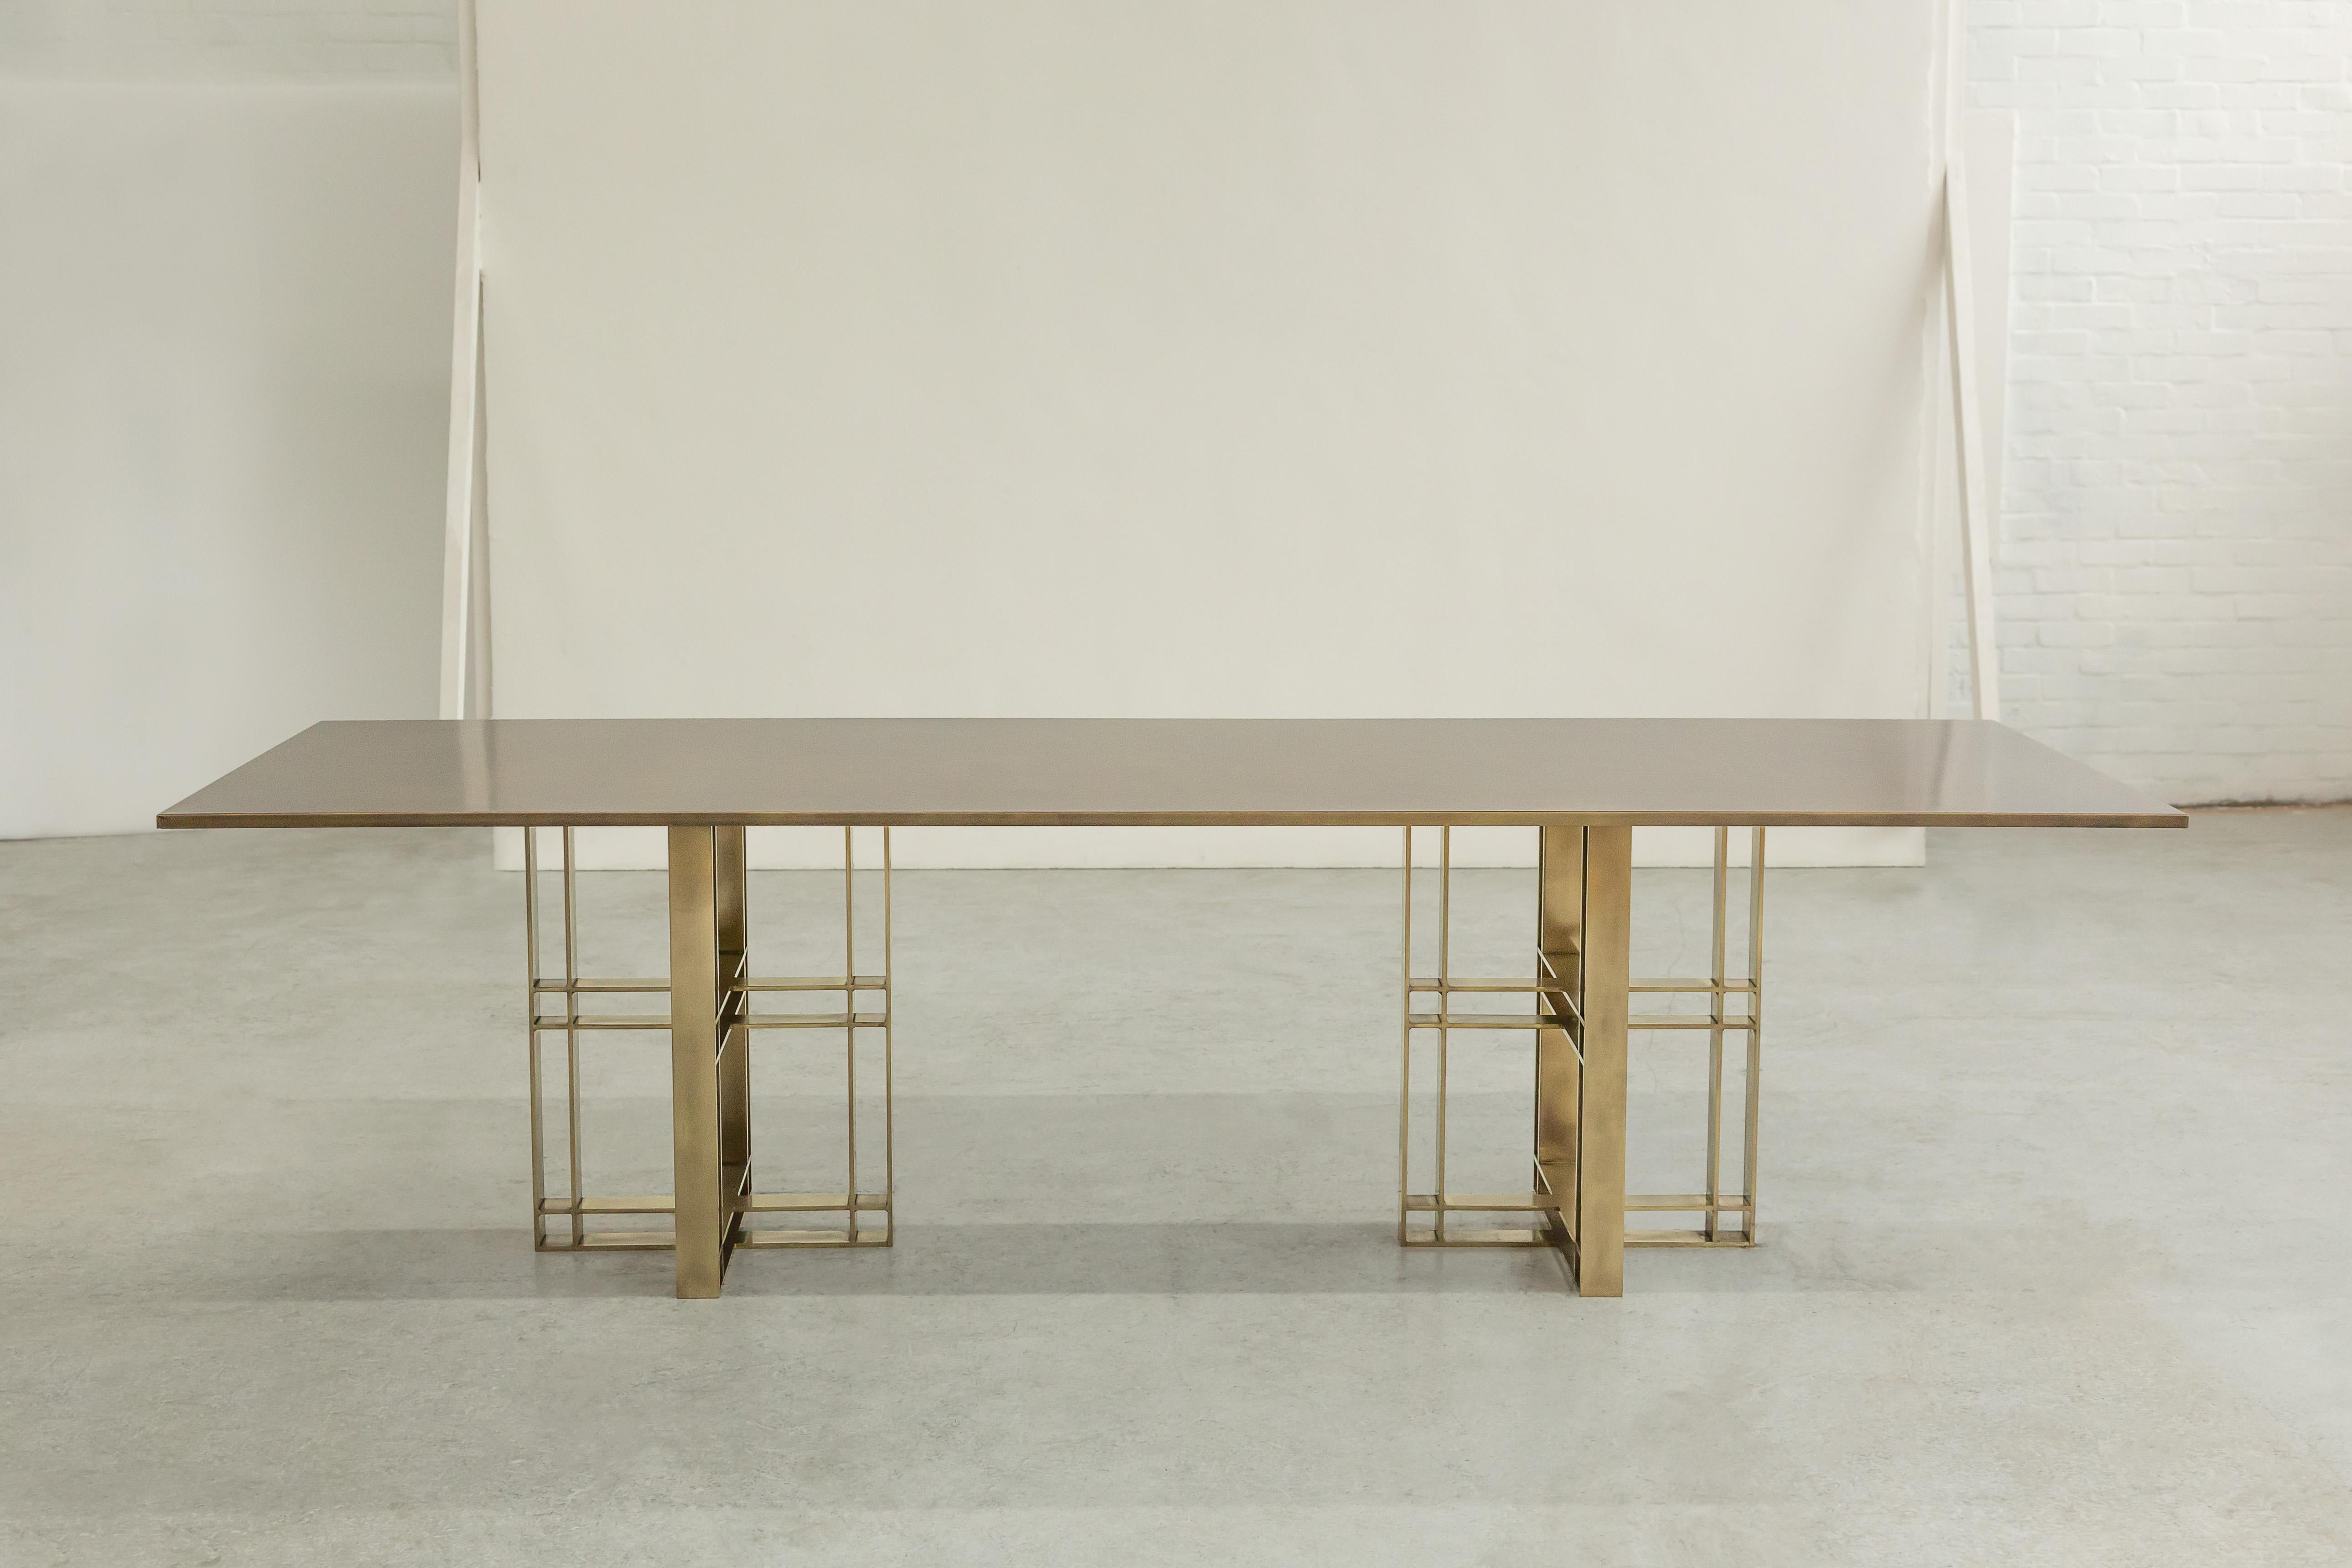 A dining table in patinated brass. Handcrafted in the North to order. Custom sizes and finishes are available.

Measures: 290cm (width) x 75cm (height) x 95cm (depth).
Custom sizes available. Available with marble or timber top.

Made to order in 12